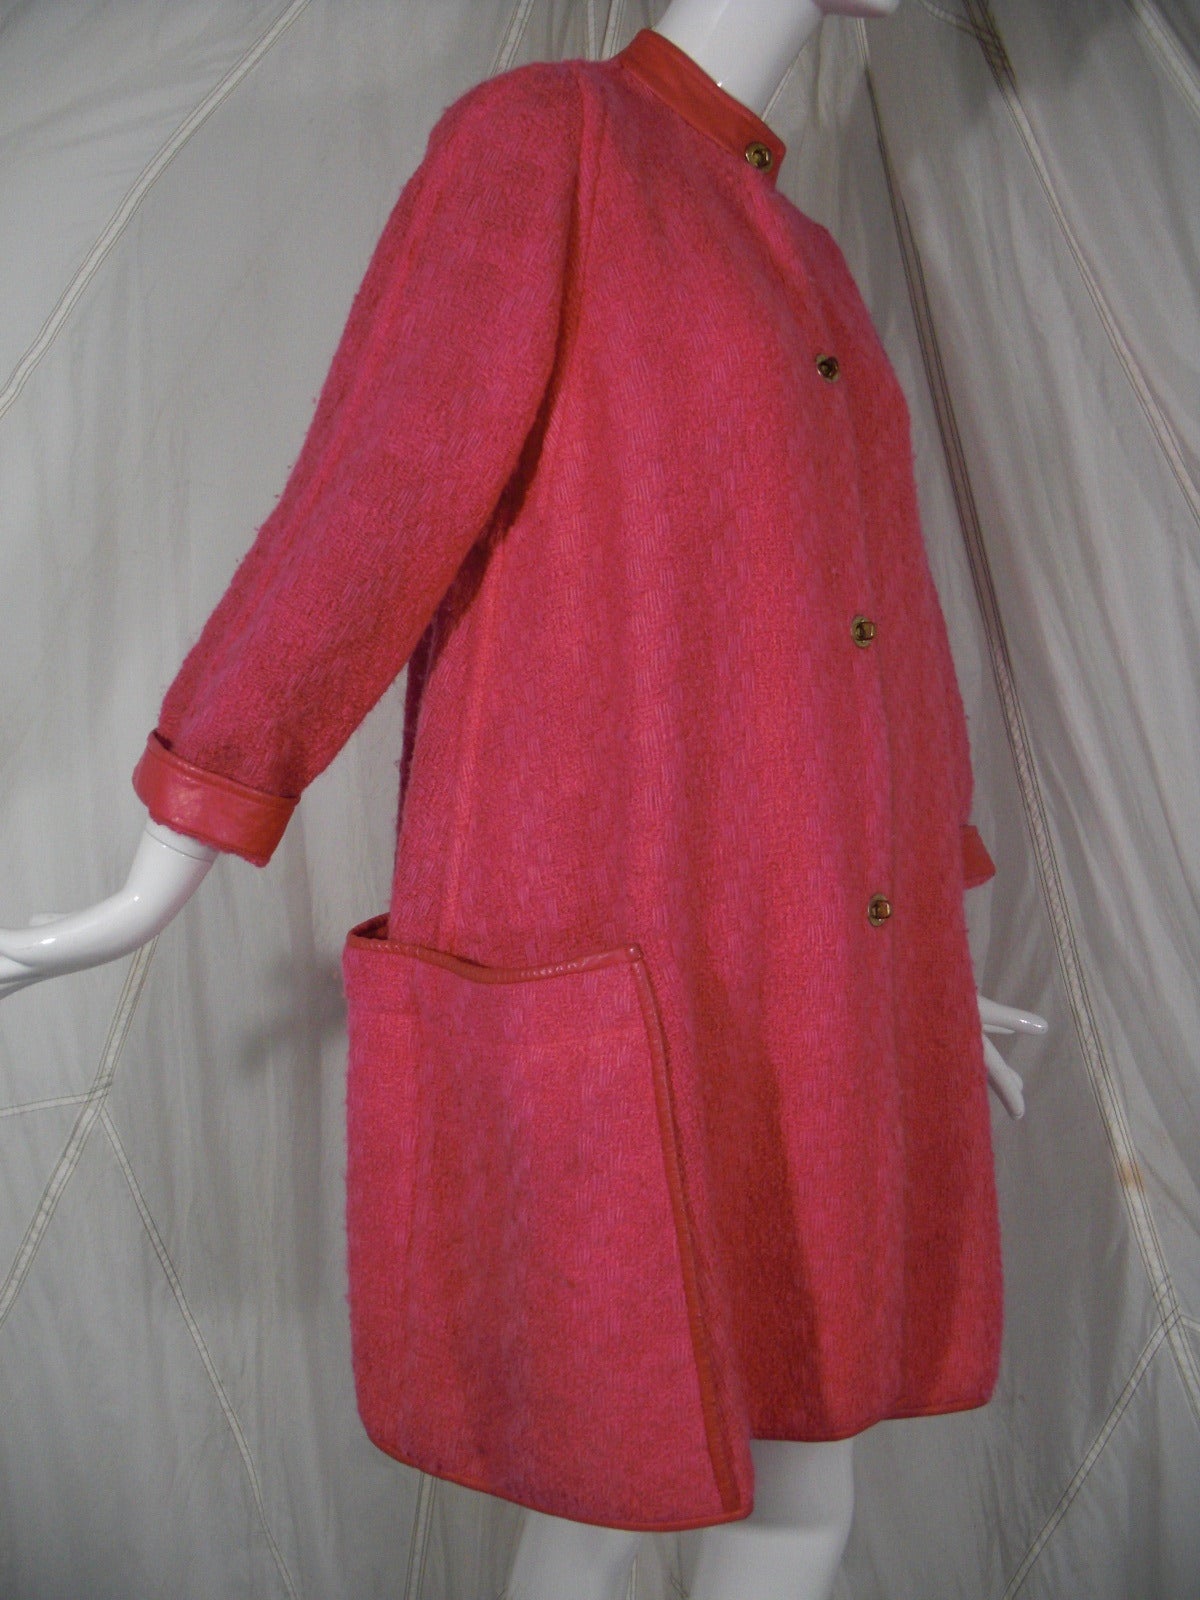 A vibrant 1960s Bonnie Cashin lipstick pink wool tweed coat with leather trim at pockets, neck and edges.  Trademark Cashin metal toggle closures. Unlined.